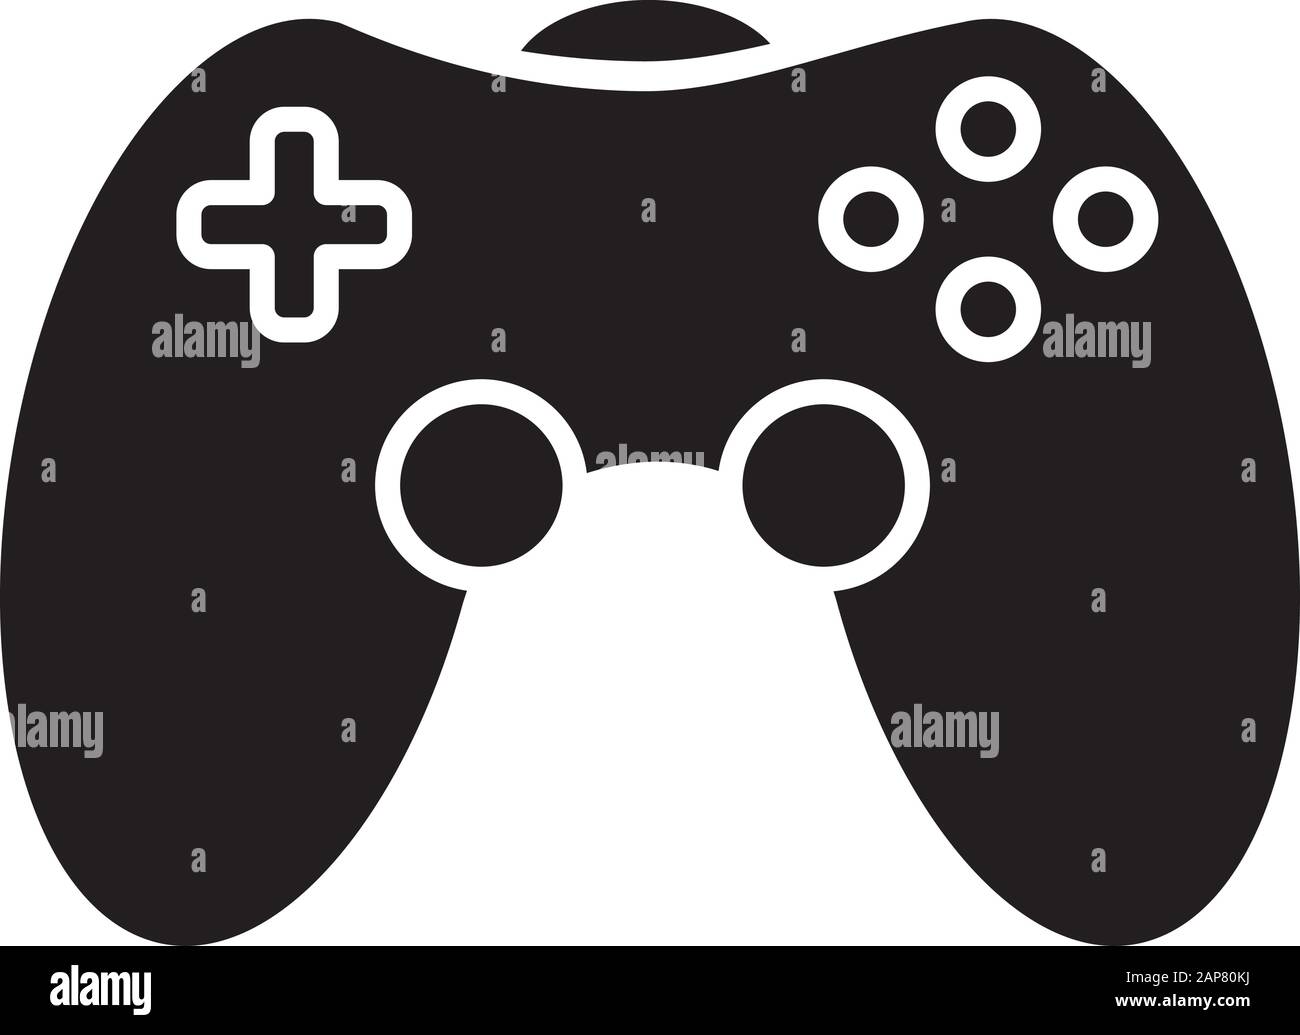 Game room glyph icon. Gamepad. Video game controller. Community recreation area. Room for spending time with friends. Joystick. Silhouette symbol. Neg Stock Vector